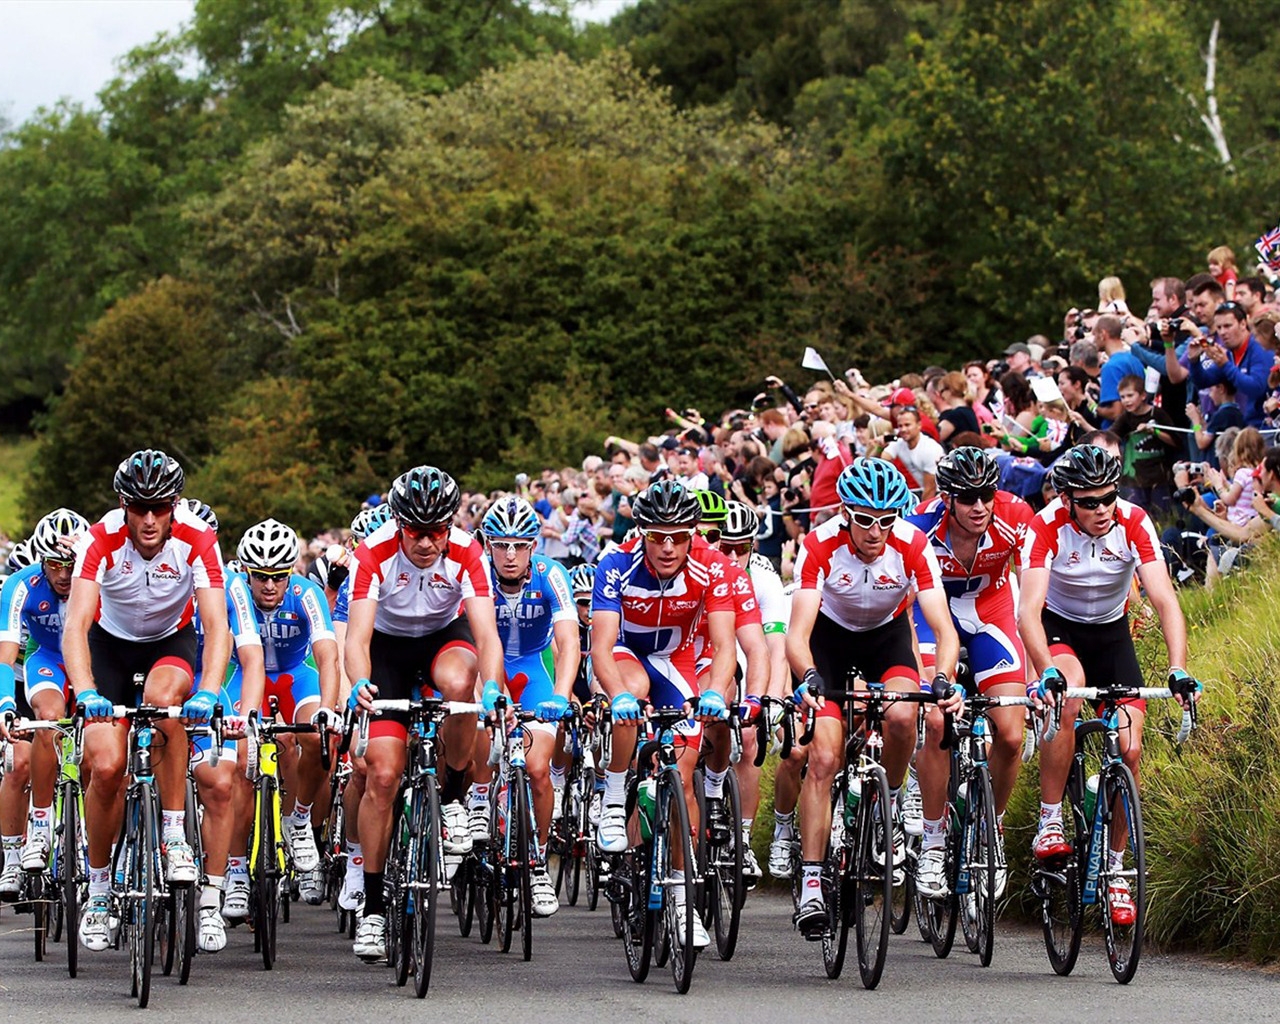 Surrey Cycle Classic for 1280 x 1024 resolution